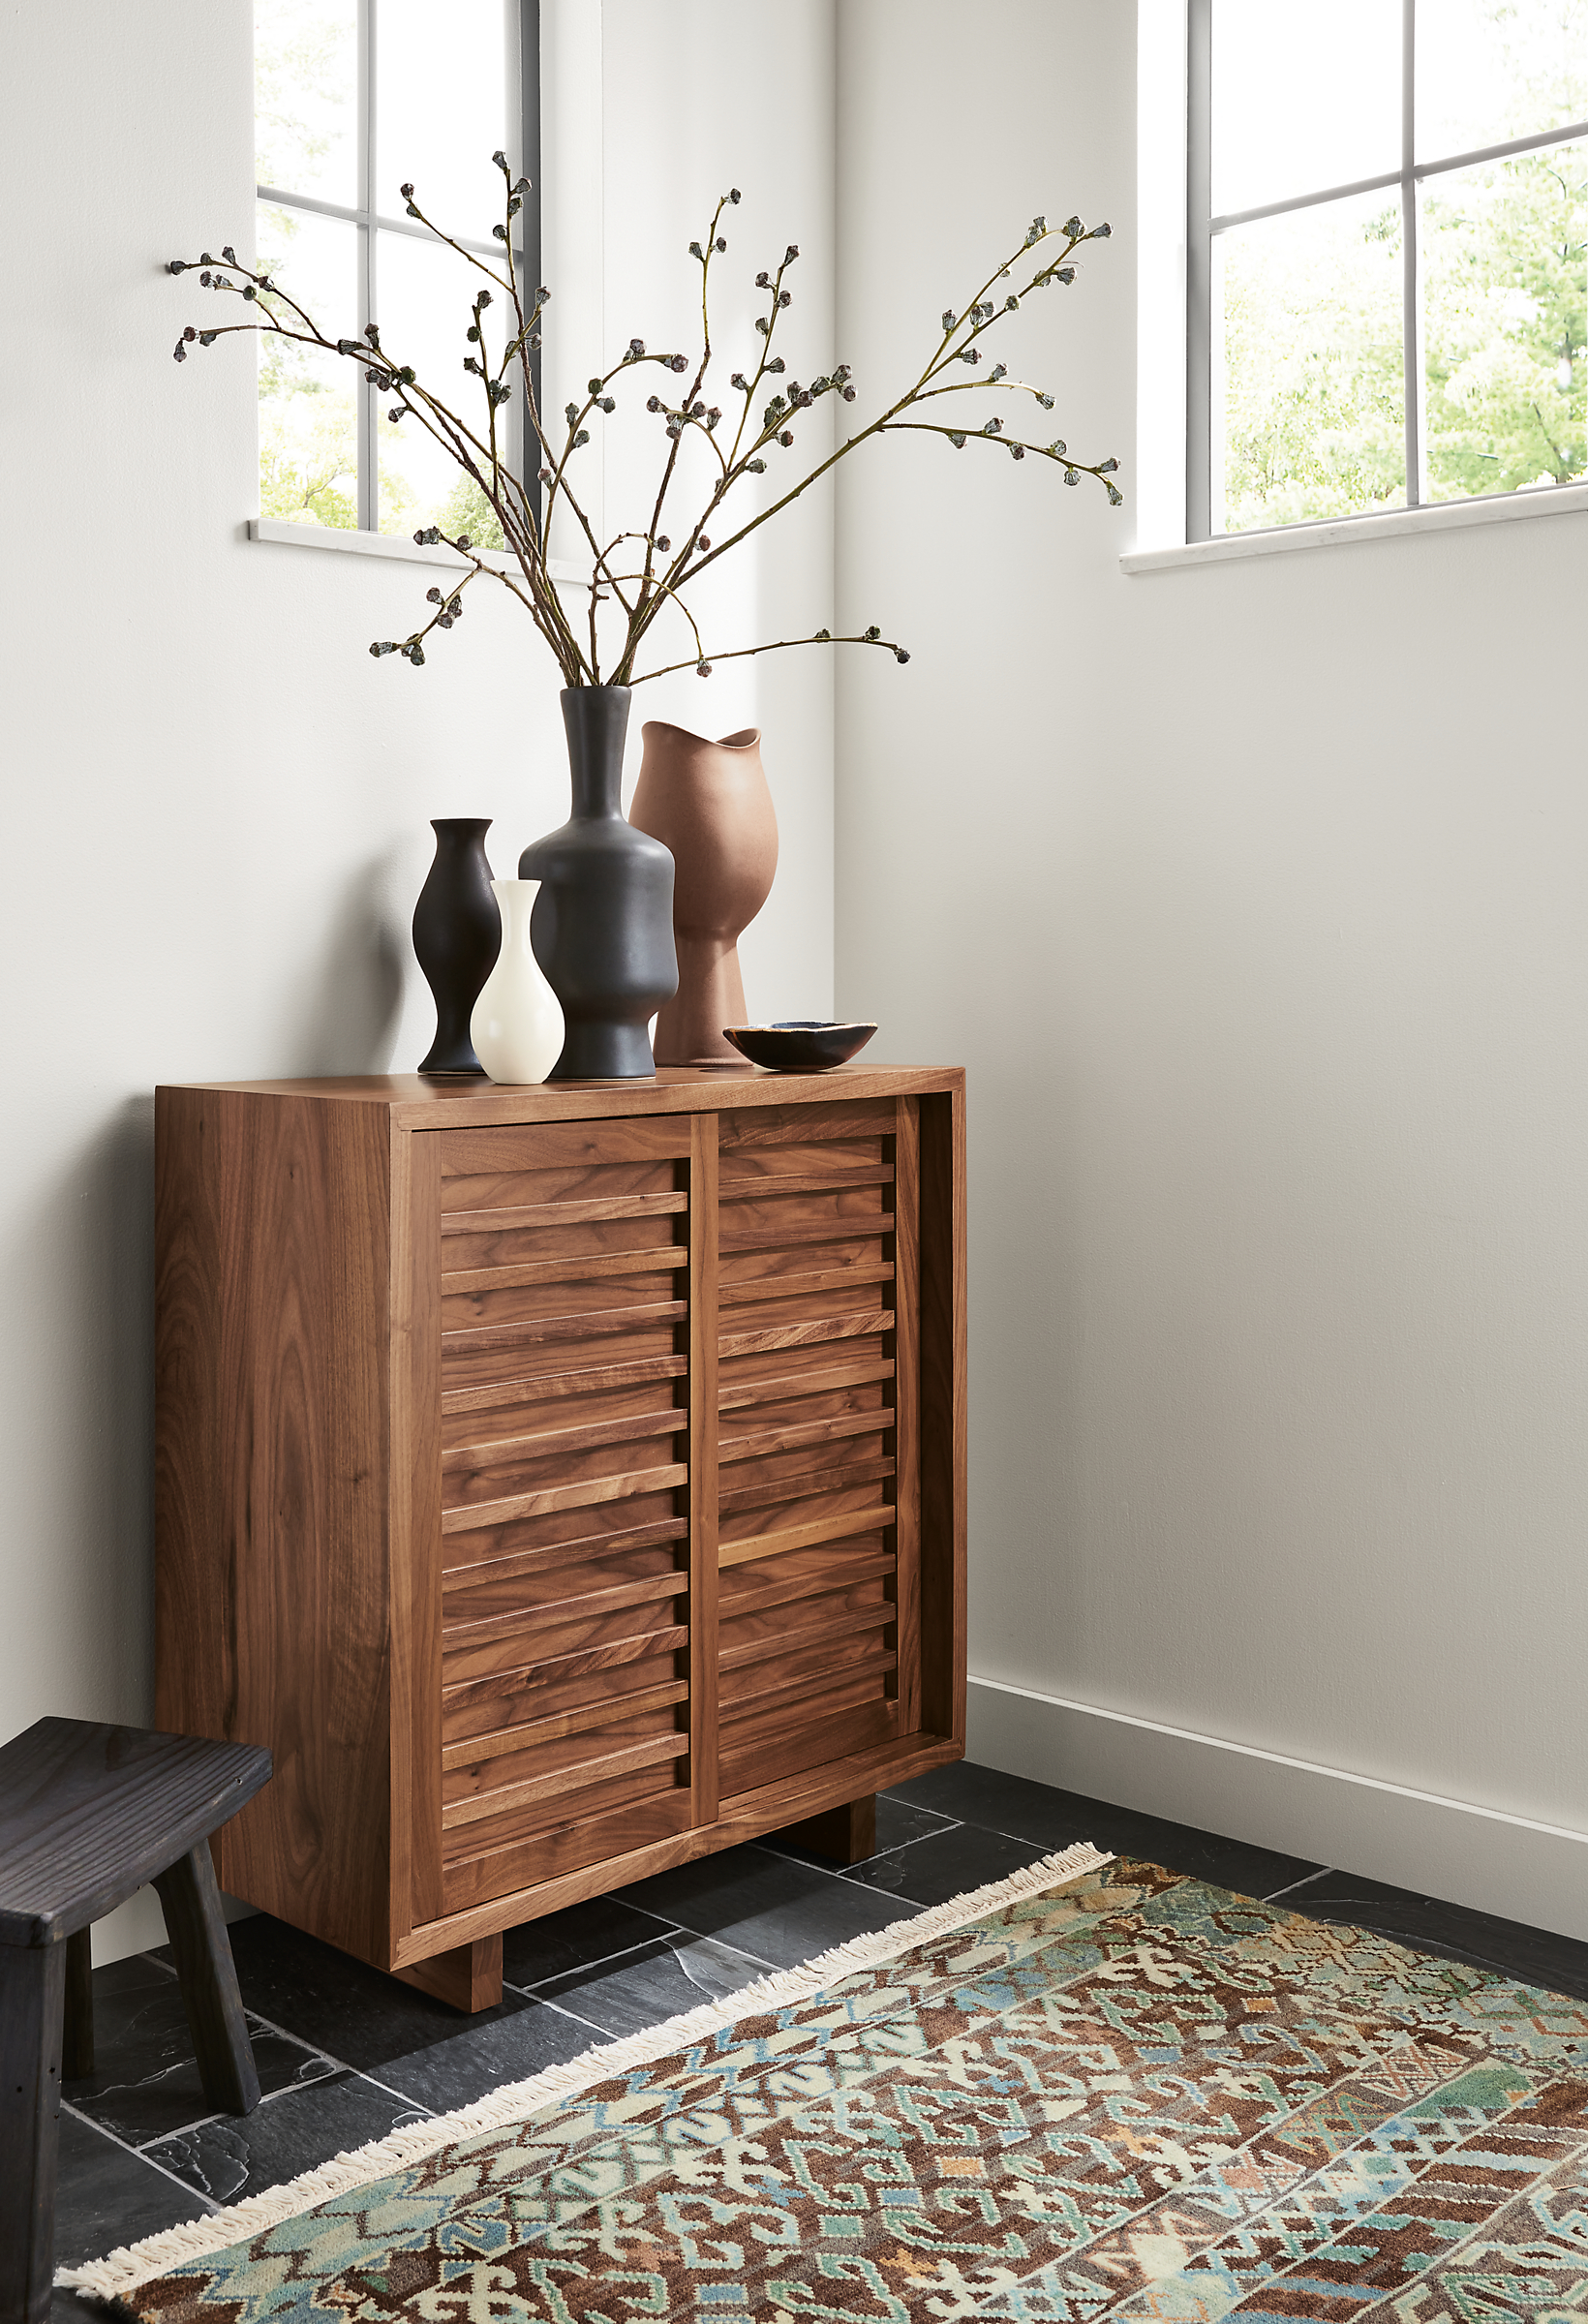 Room setting with a Moro 30-wide storage cabinet in Walnut and a Timuri rug.